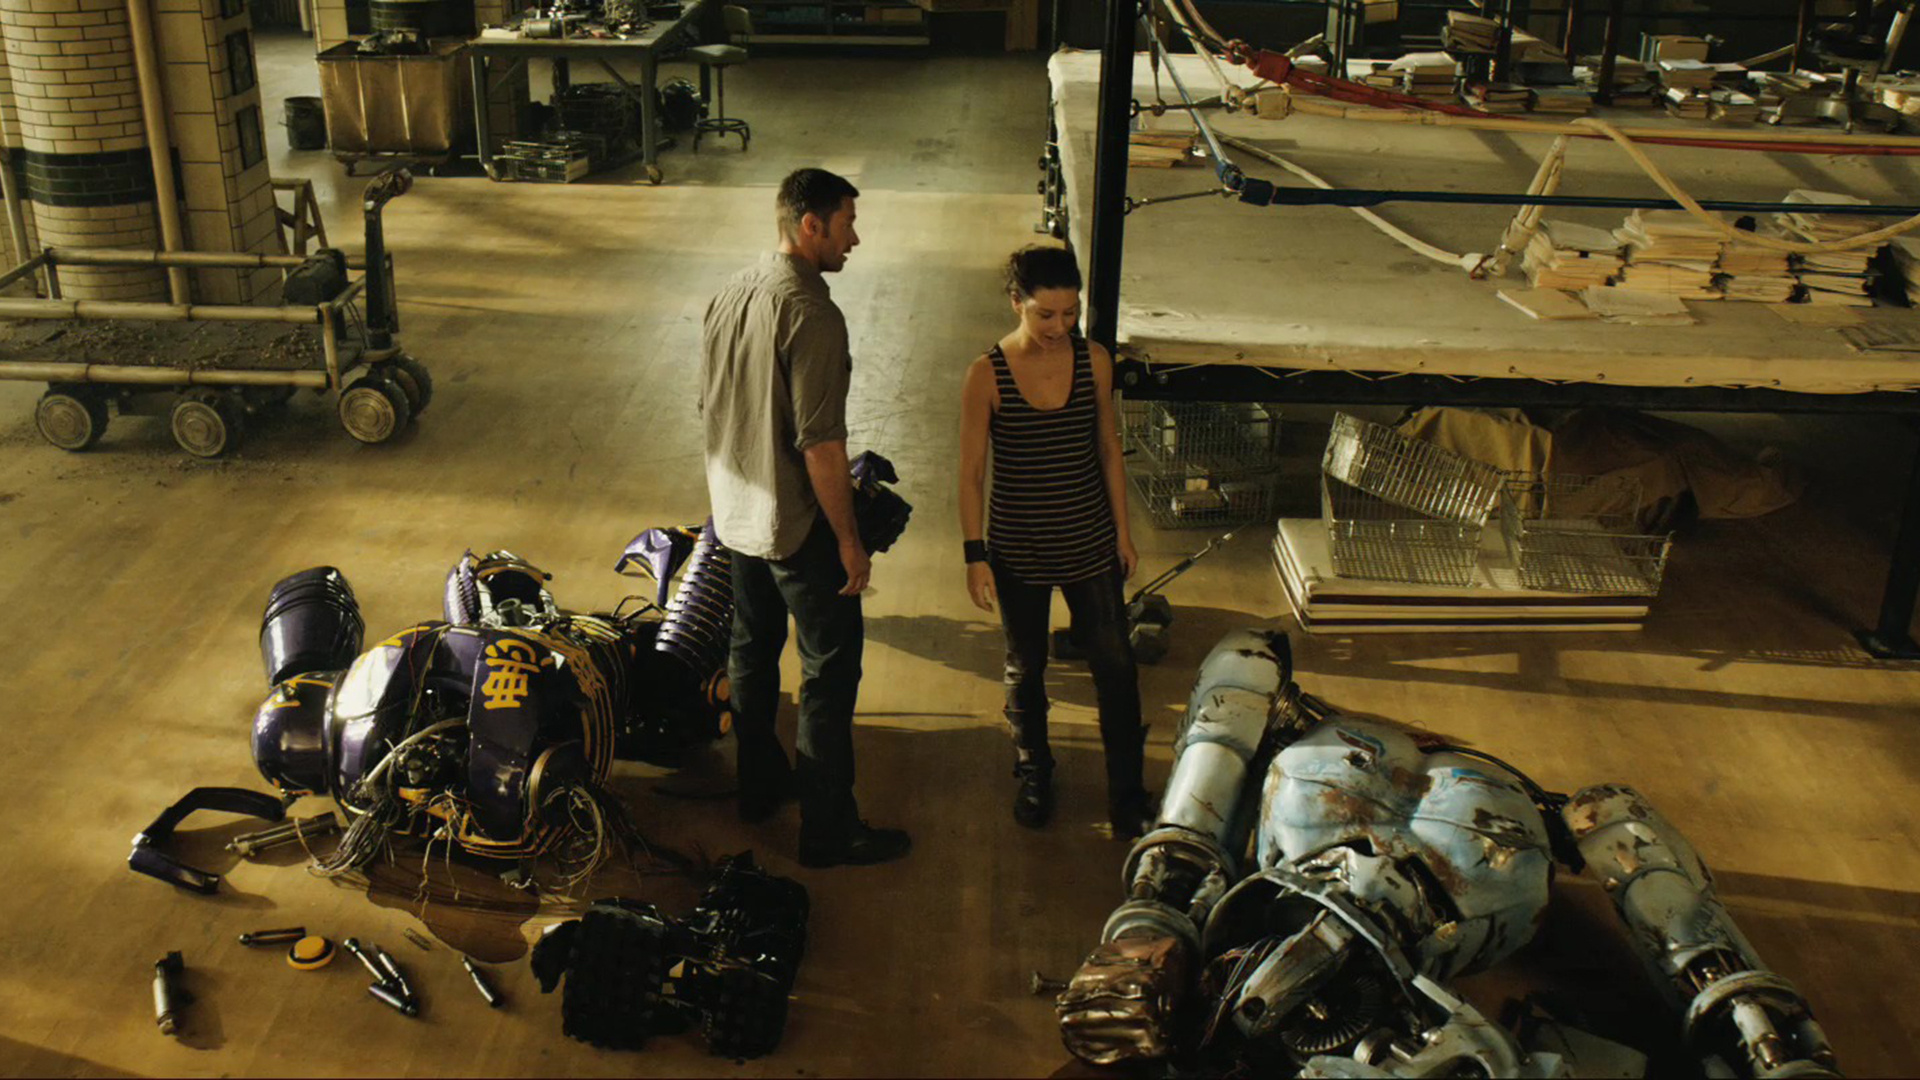 Real Steel: Human boxers replaced by robots, 2020, Robots' duel. 1920x1080 Full HD Wallpaper.